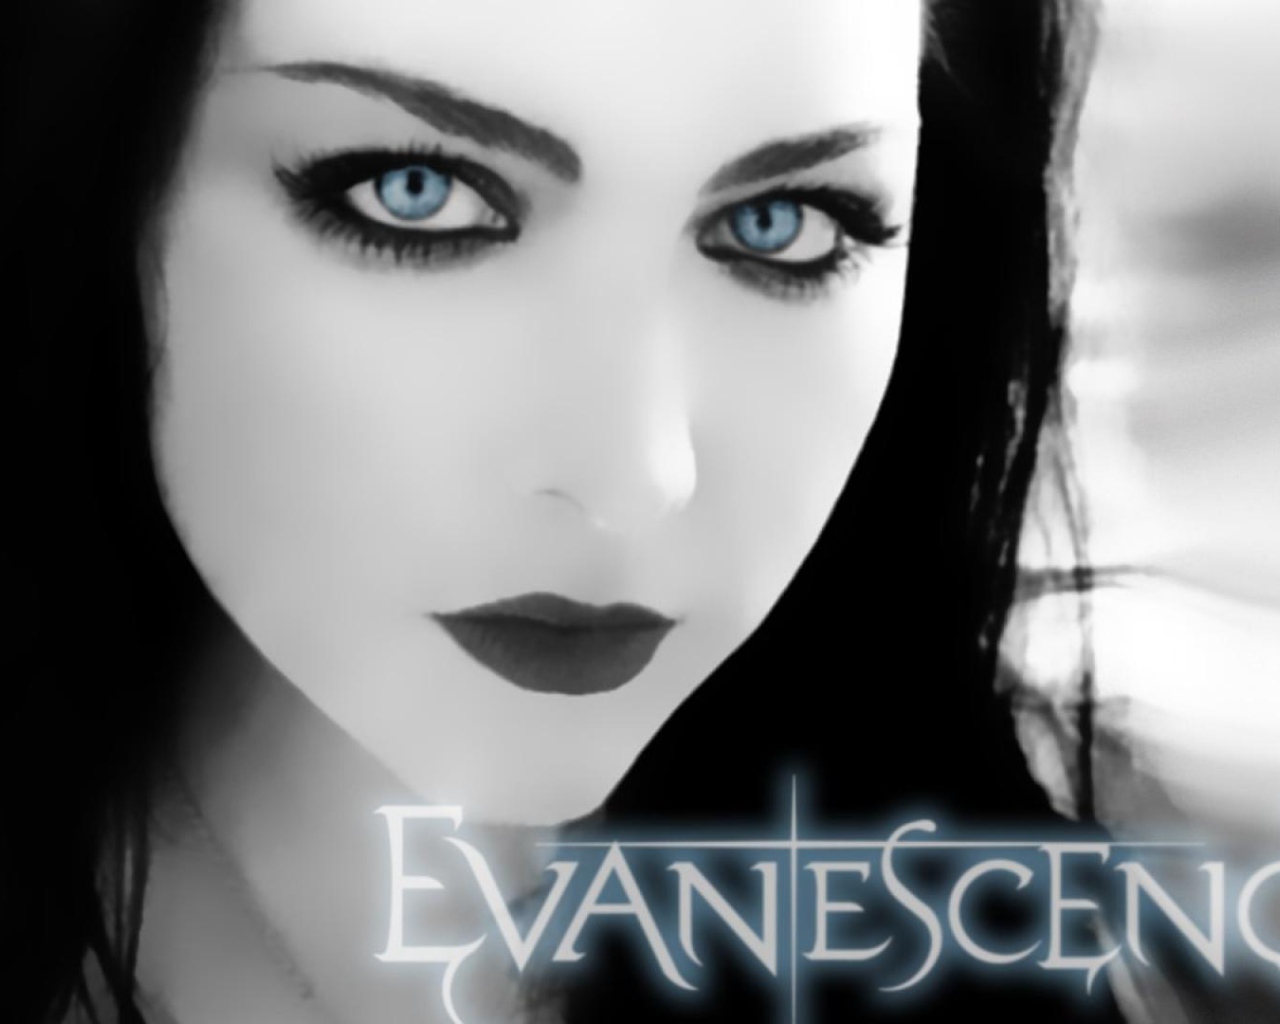 Artist Amy Lee of Evanescence